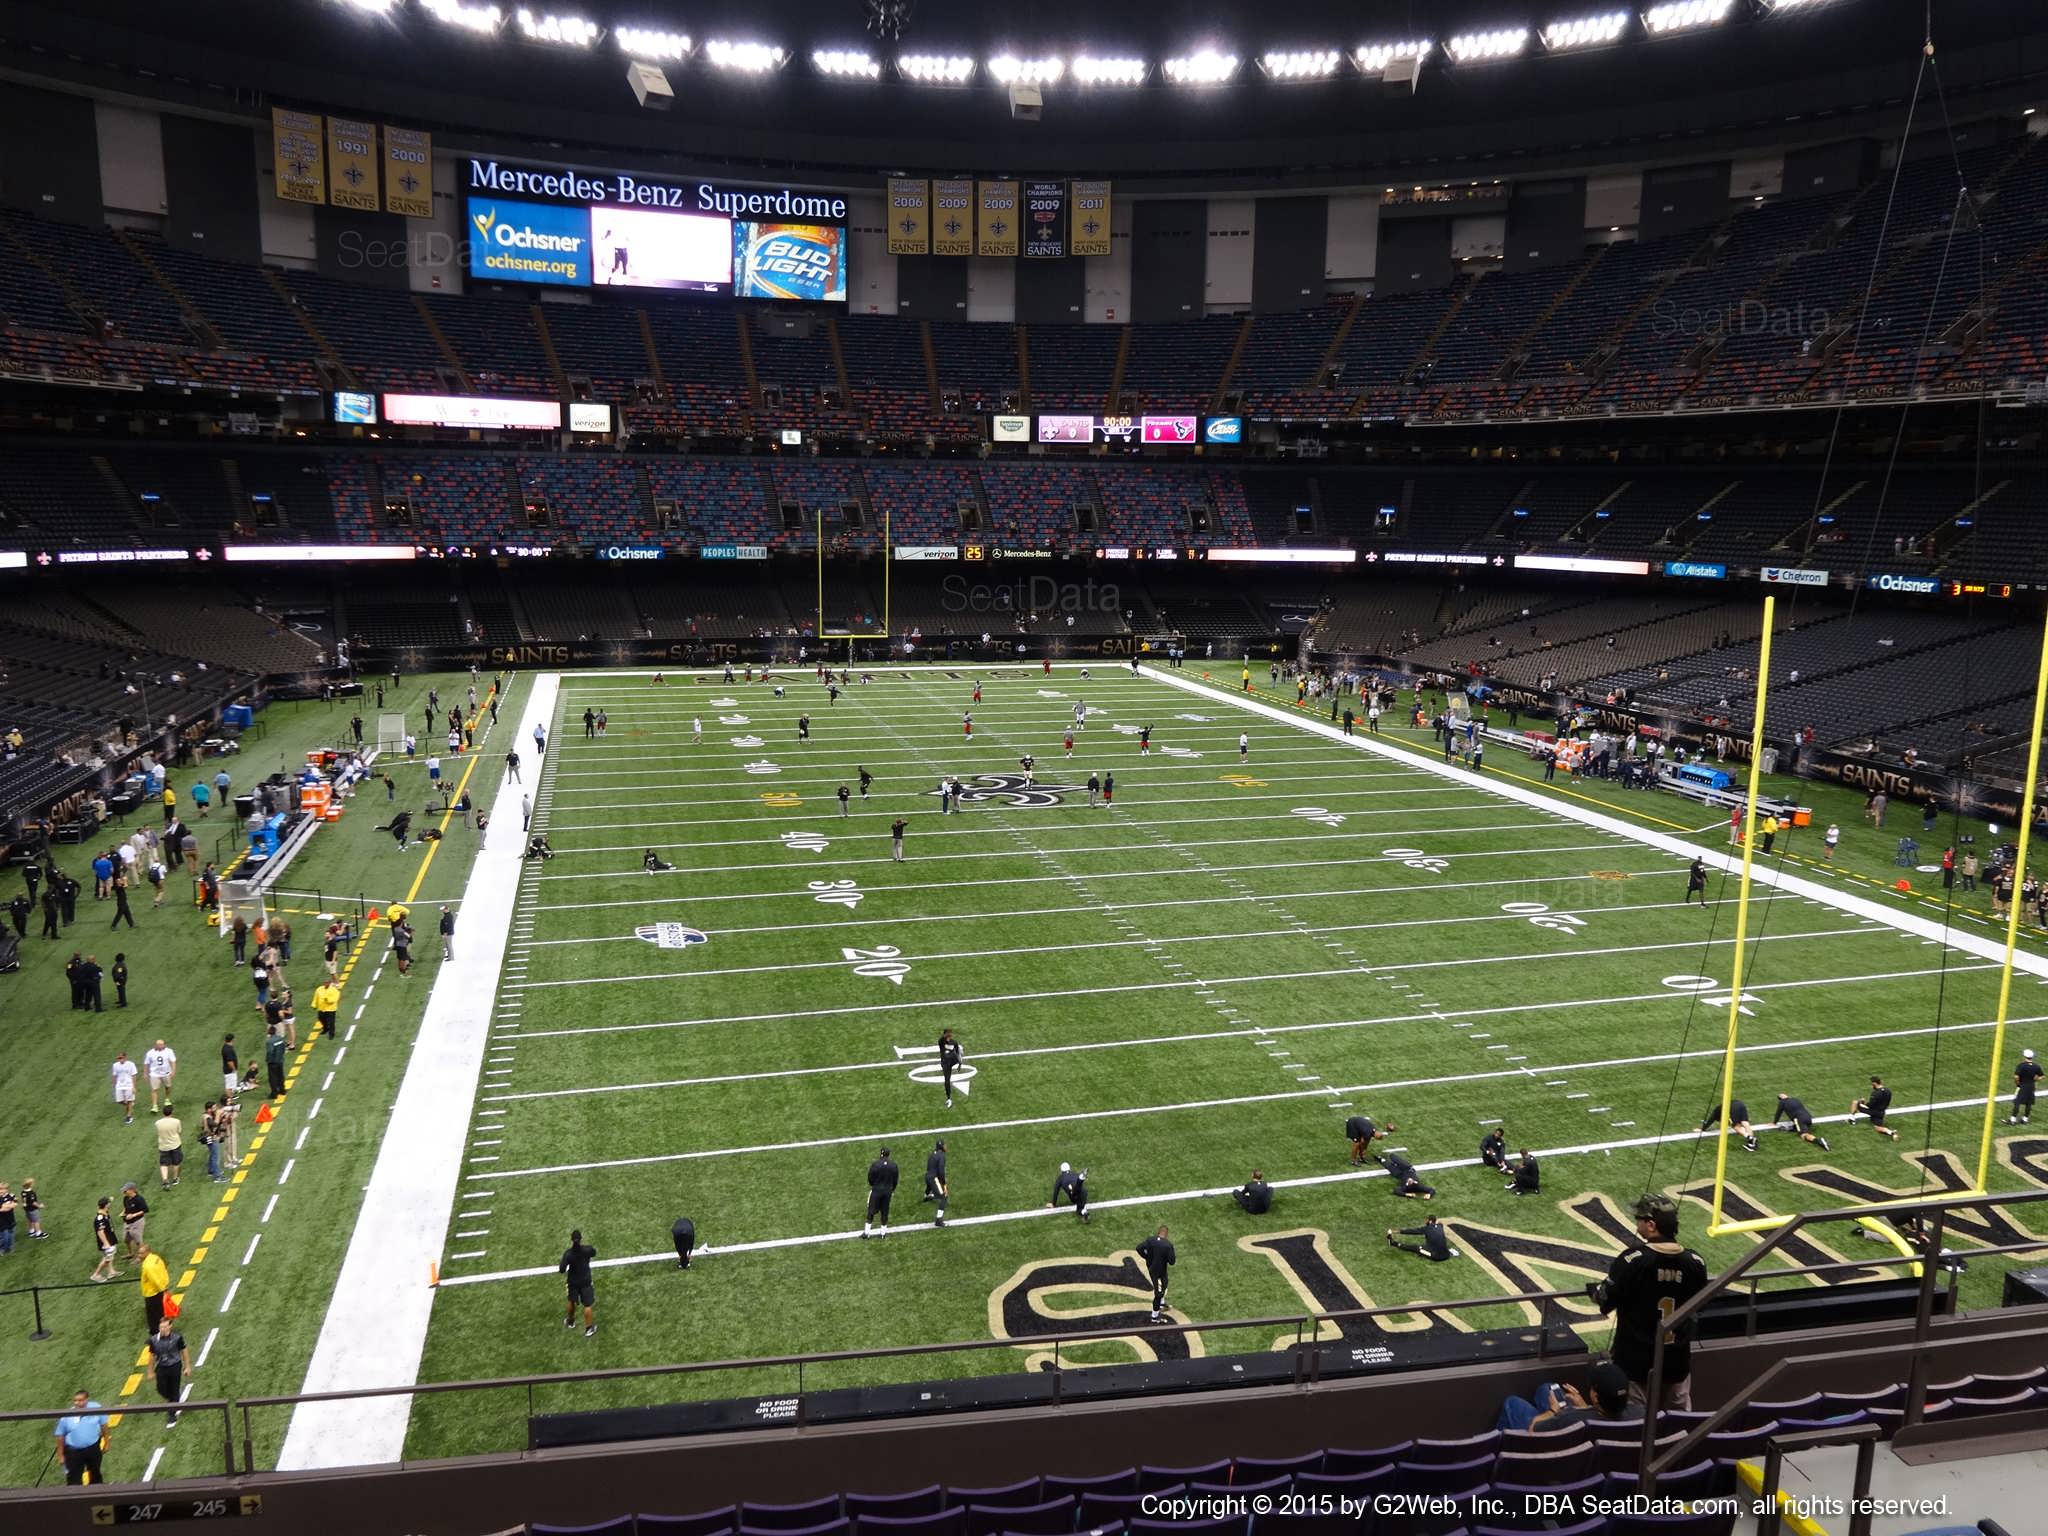 Seat view from section 326 at the Mercedes-Benz Superdome, home of the New Orleans Saints